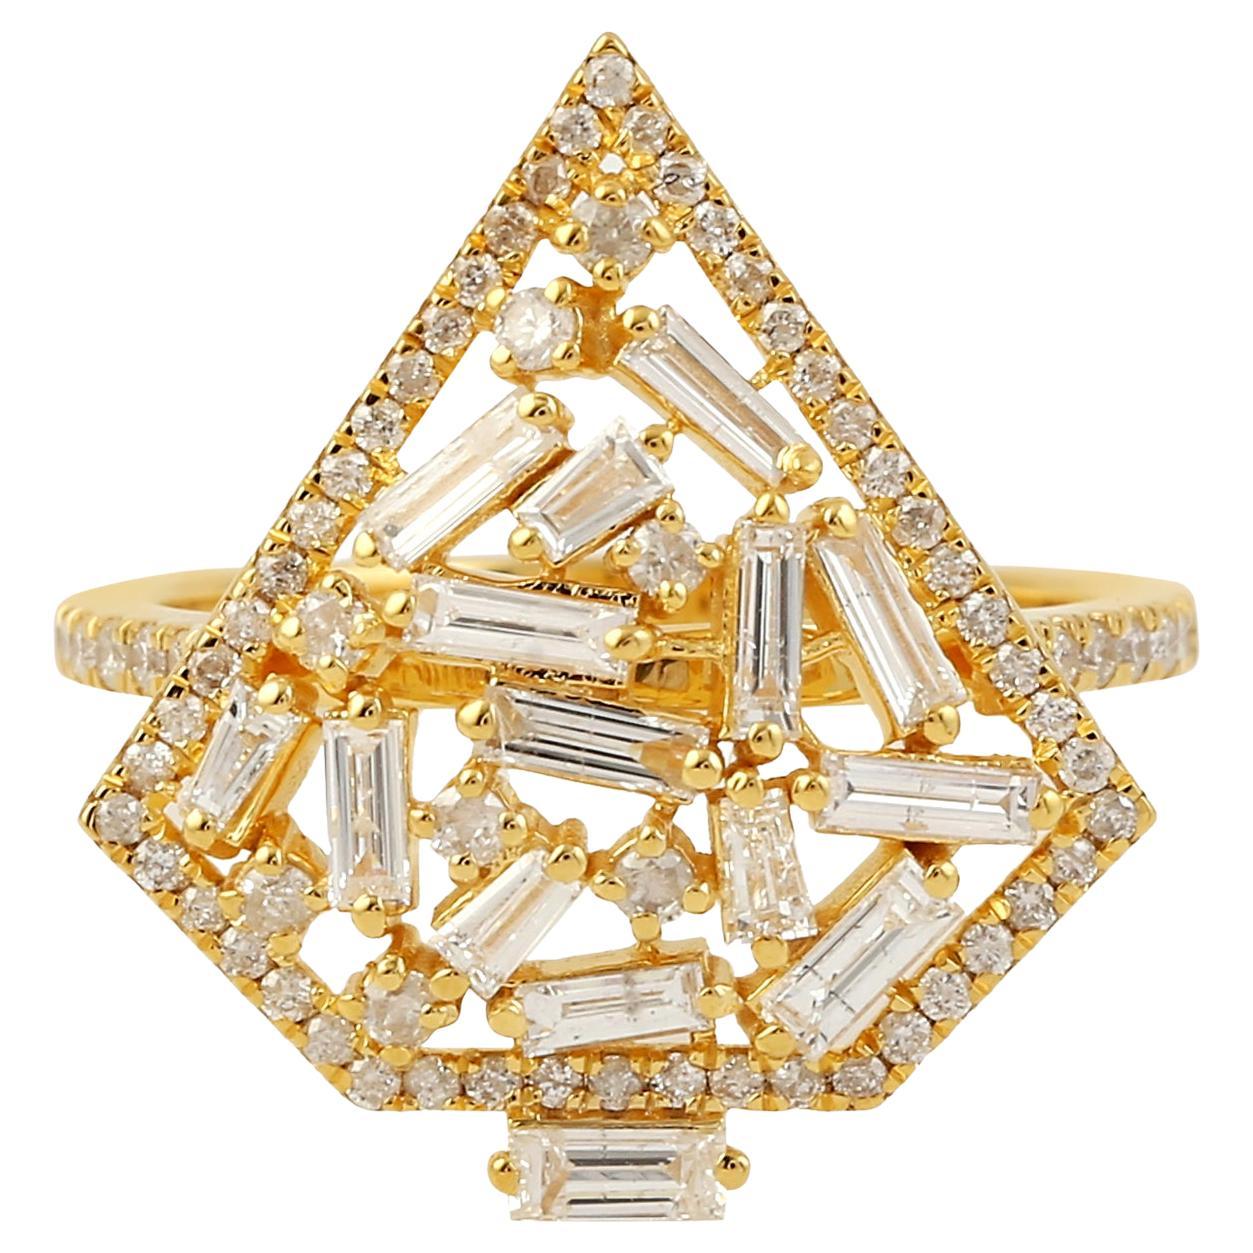 Pentagon Shaped Baguette Diamonds Ring With Pave Diamonds In 18k yellow Gold For Sale